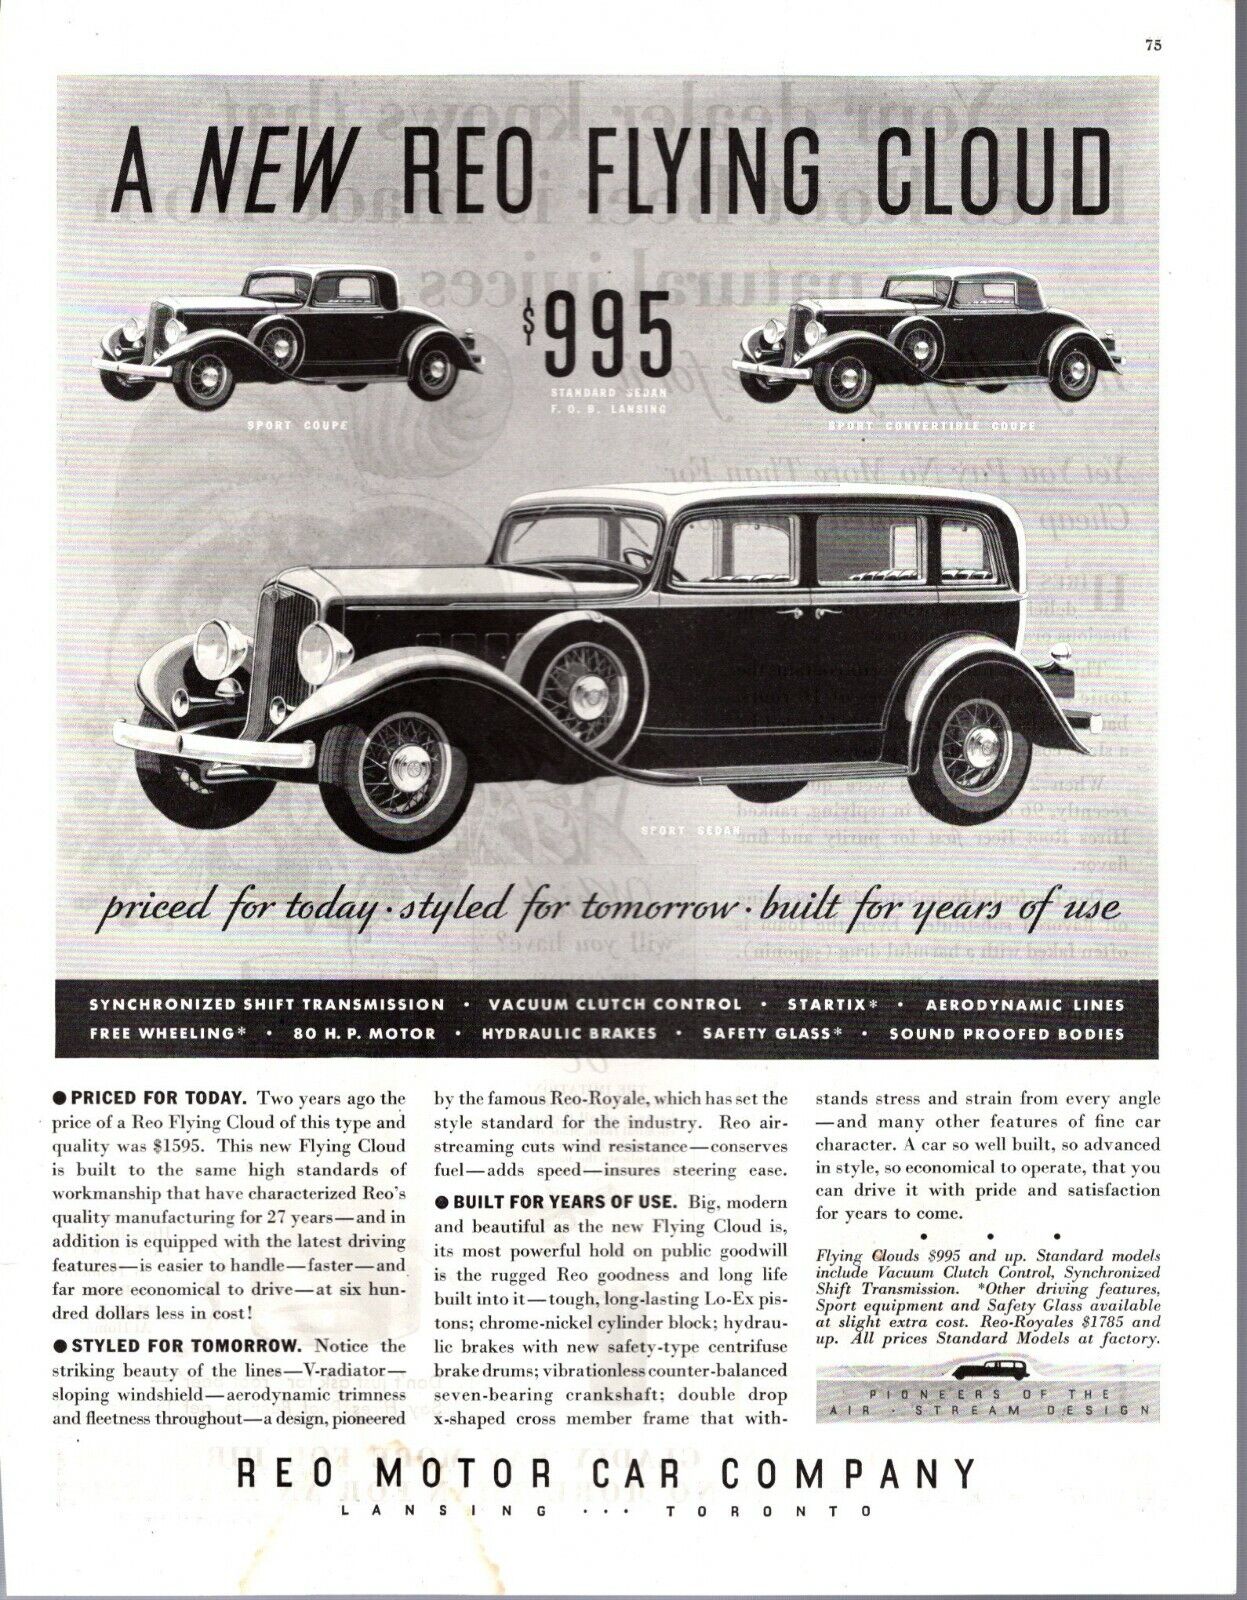 1932 Reo Flying Cloud 3 models Original auto ad -  Extremely rare